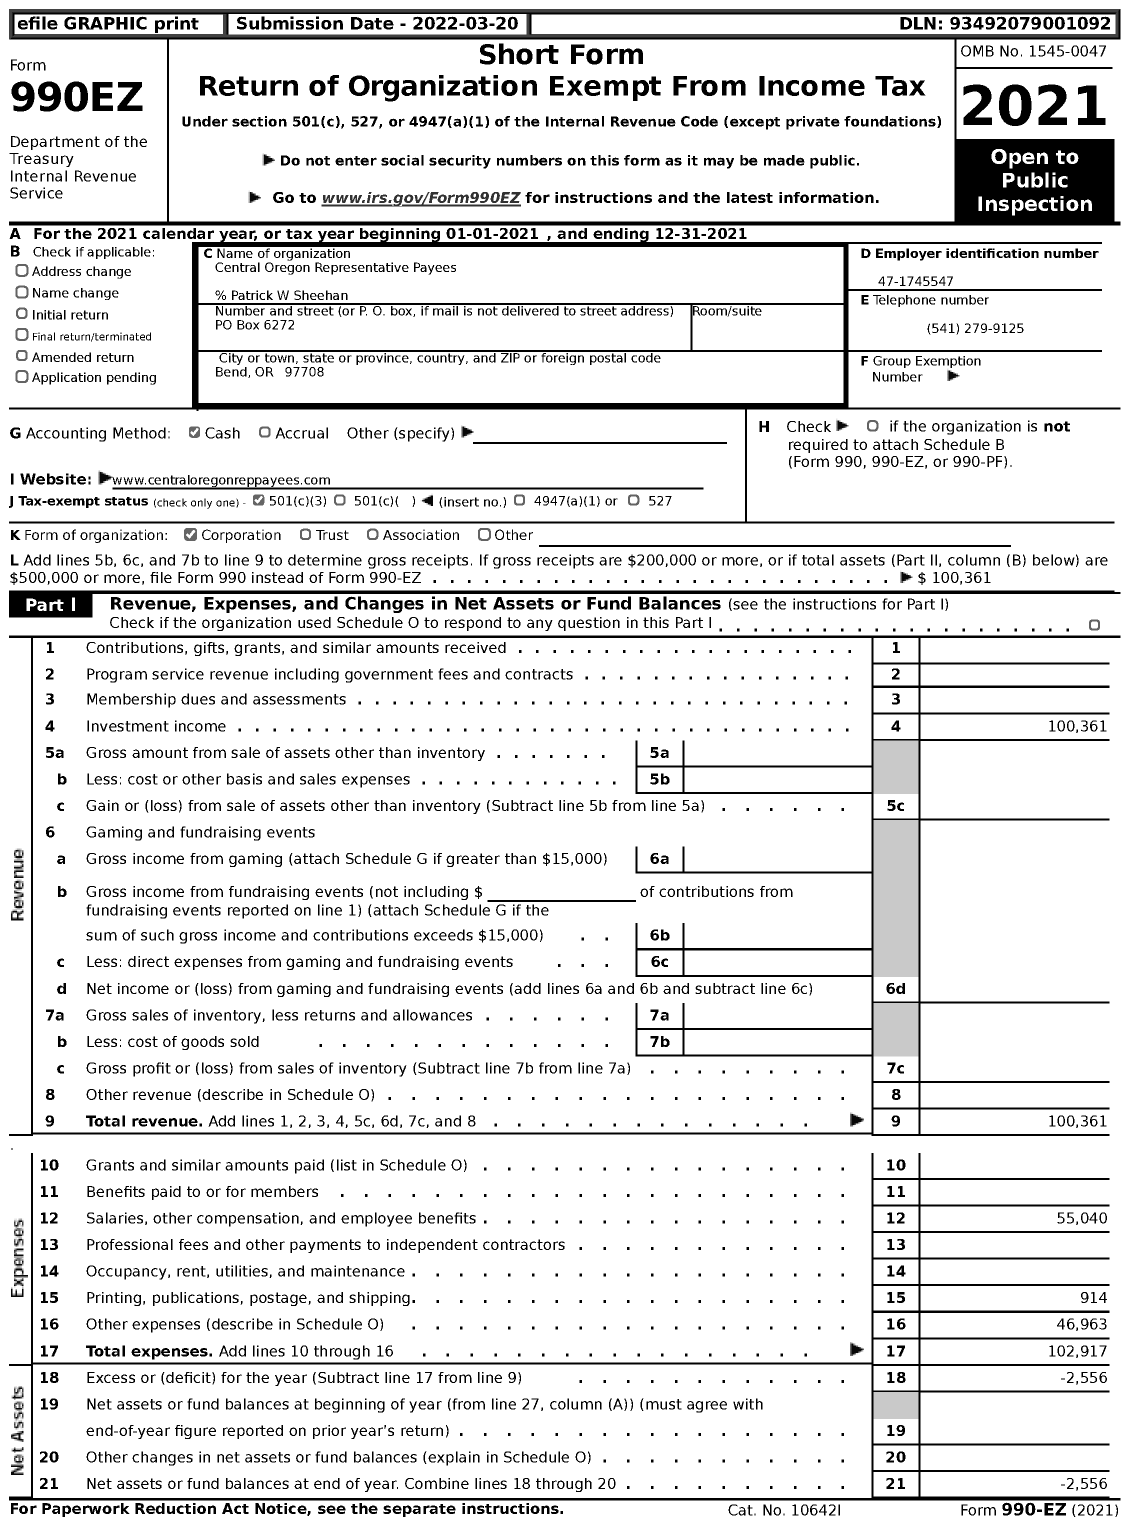 Image of first page of 2021 Form 990EZ for Central Oregon Representative Payees